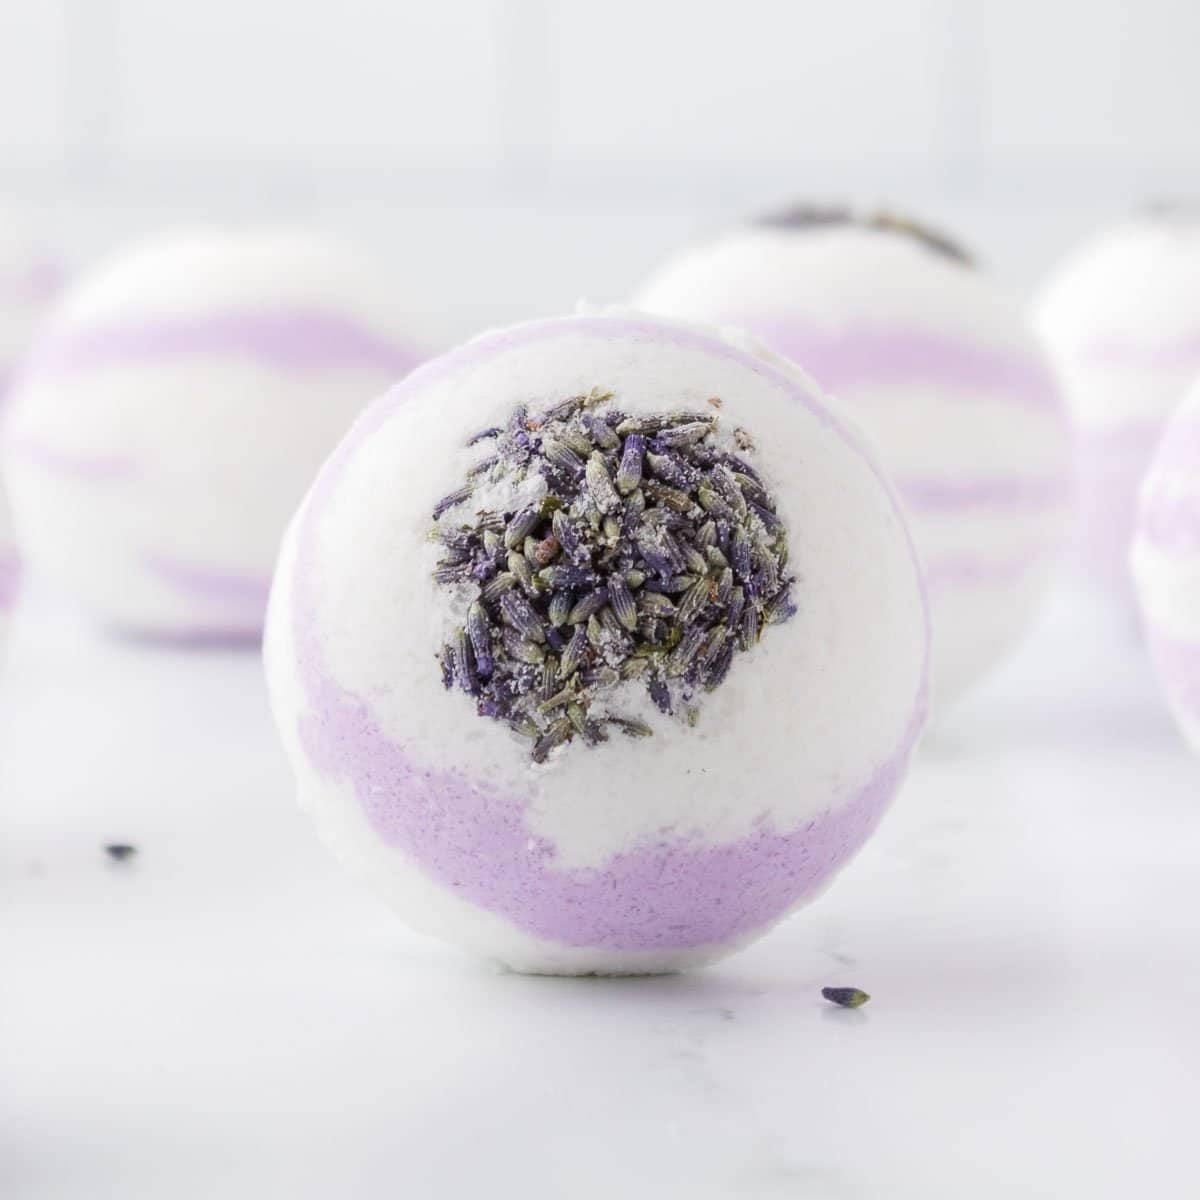 How to Make Lavender Bath Bombs